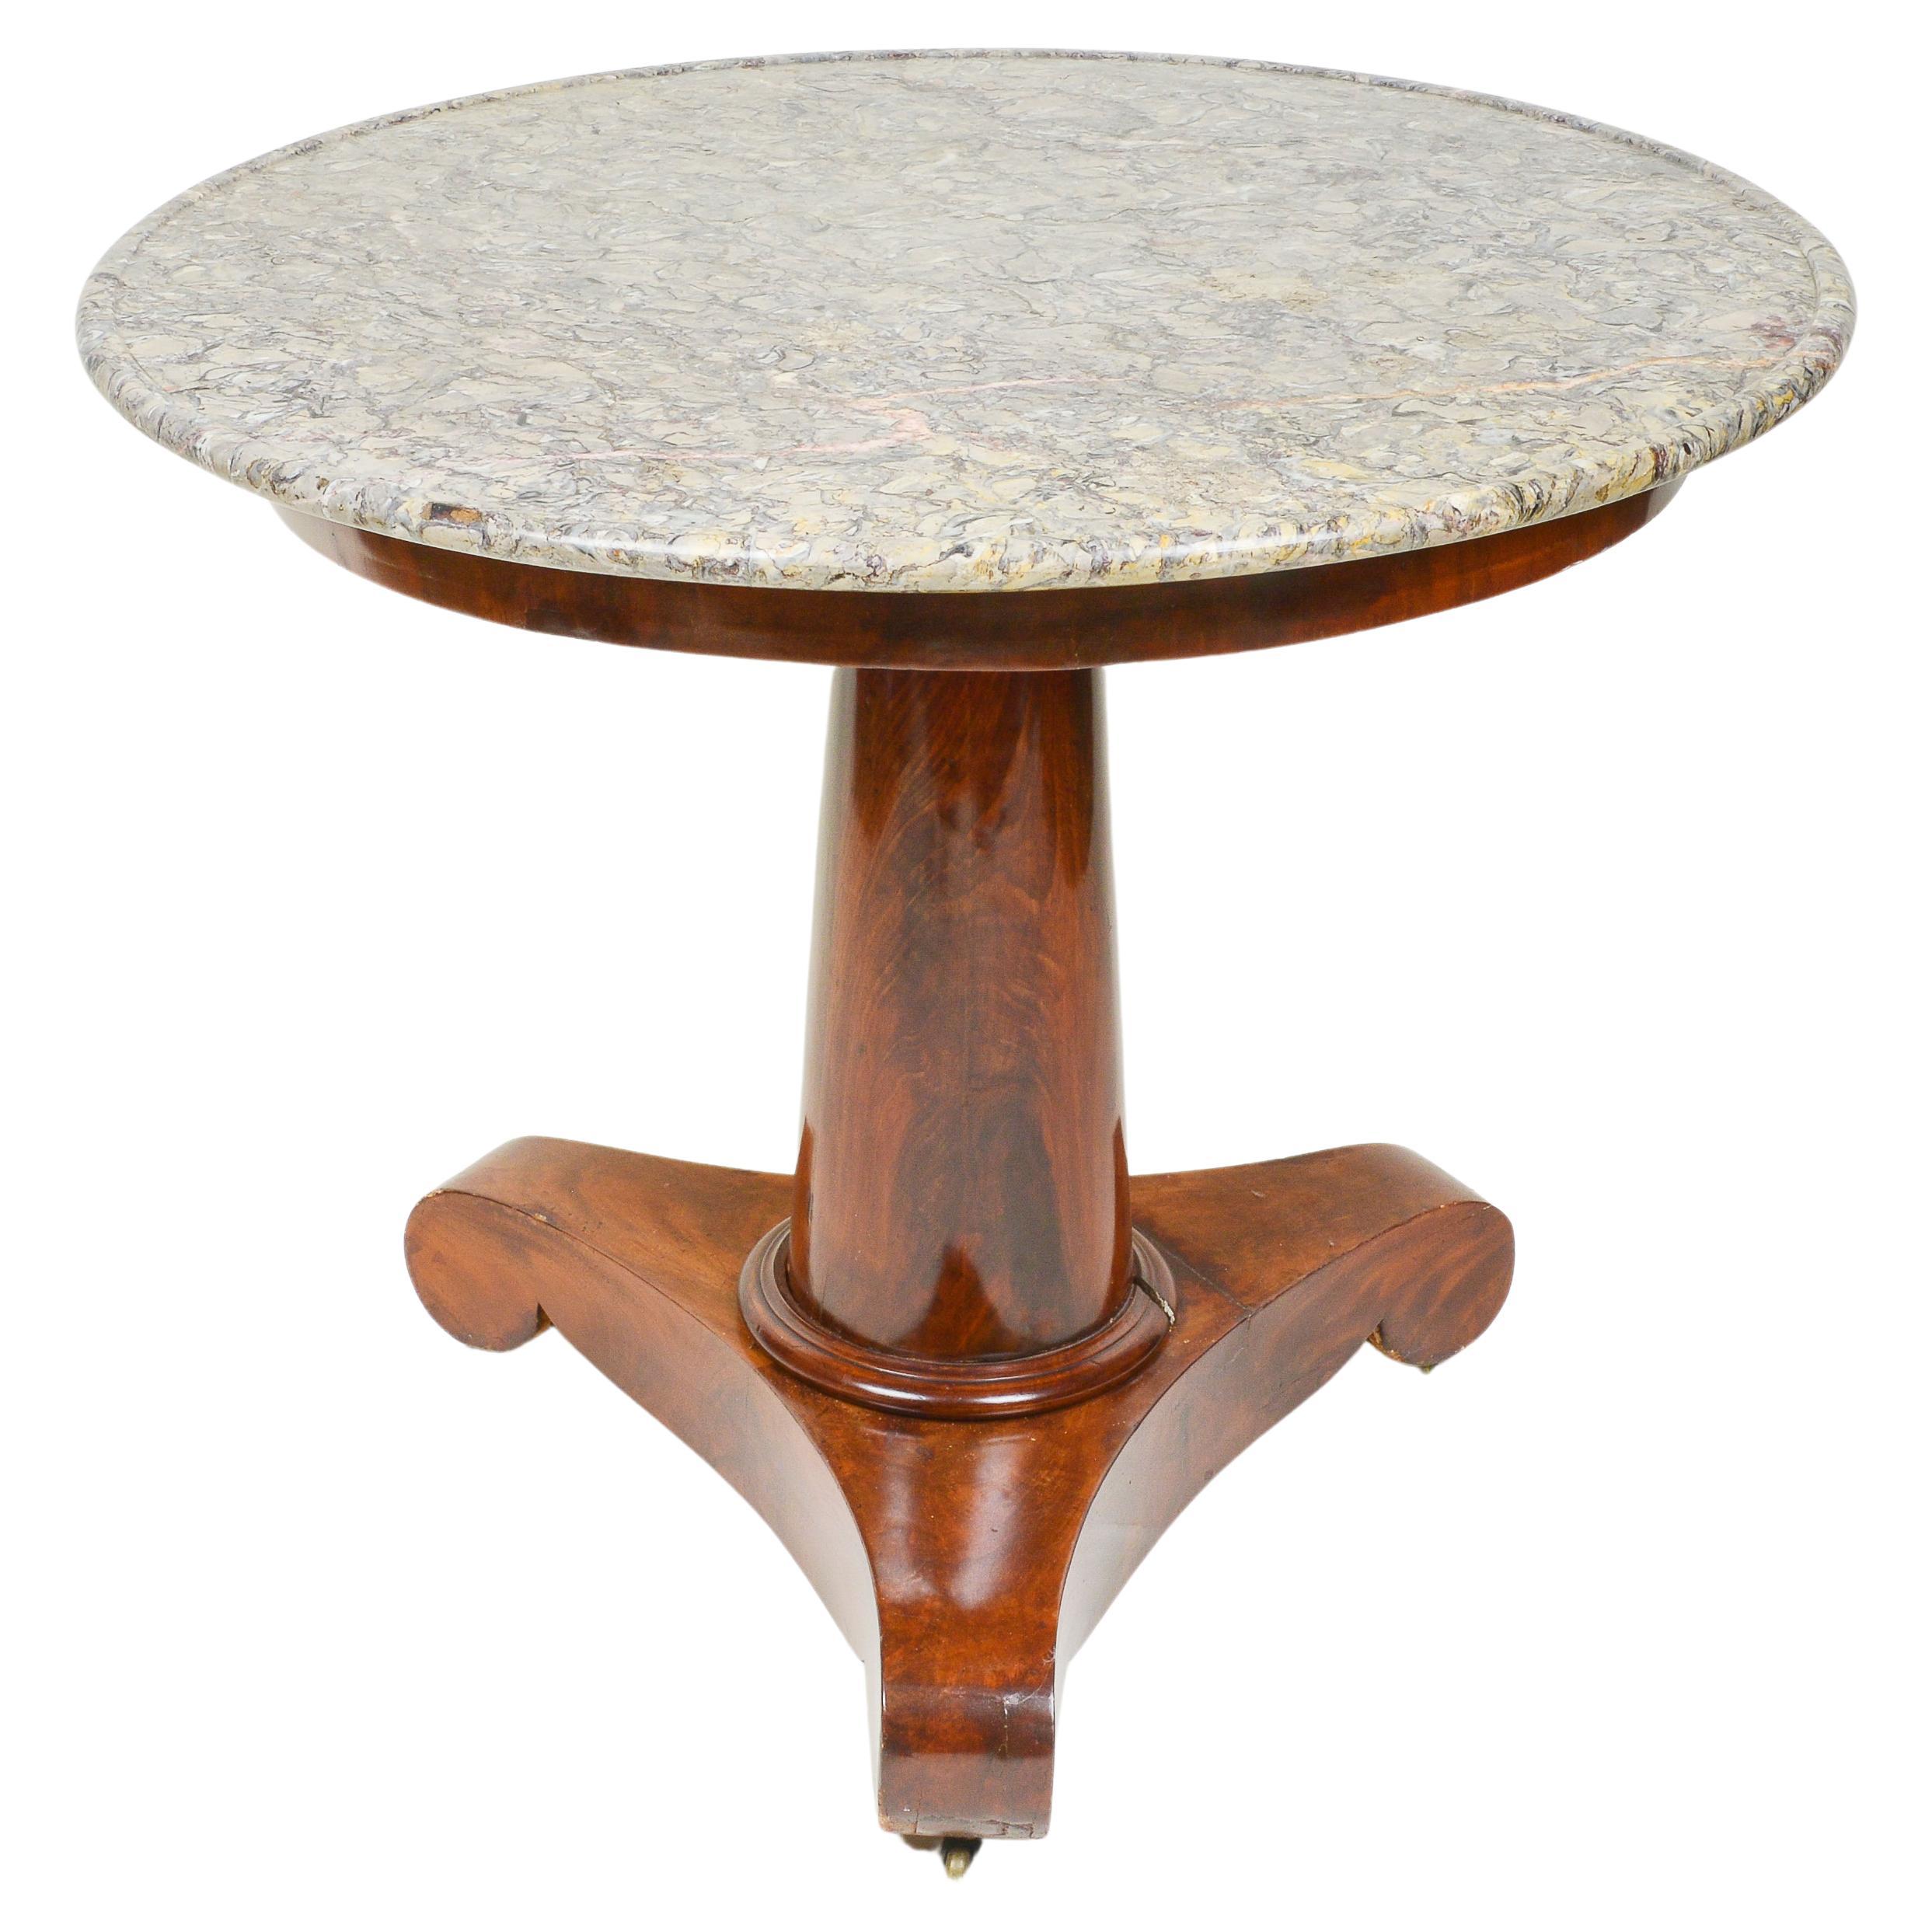 A French Empire Mahogany Gueridon with a Gray Marble Top For Sale